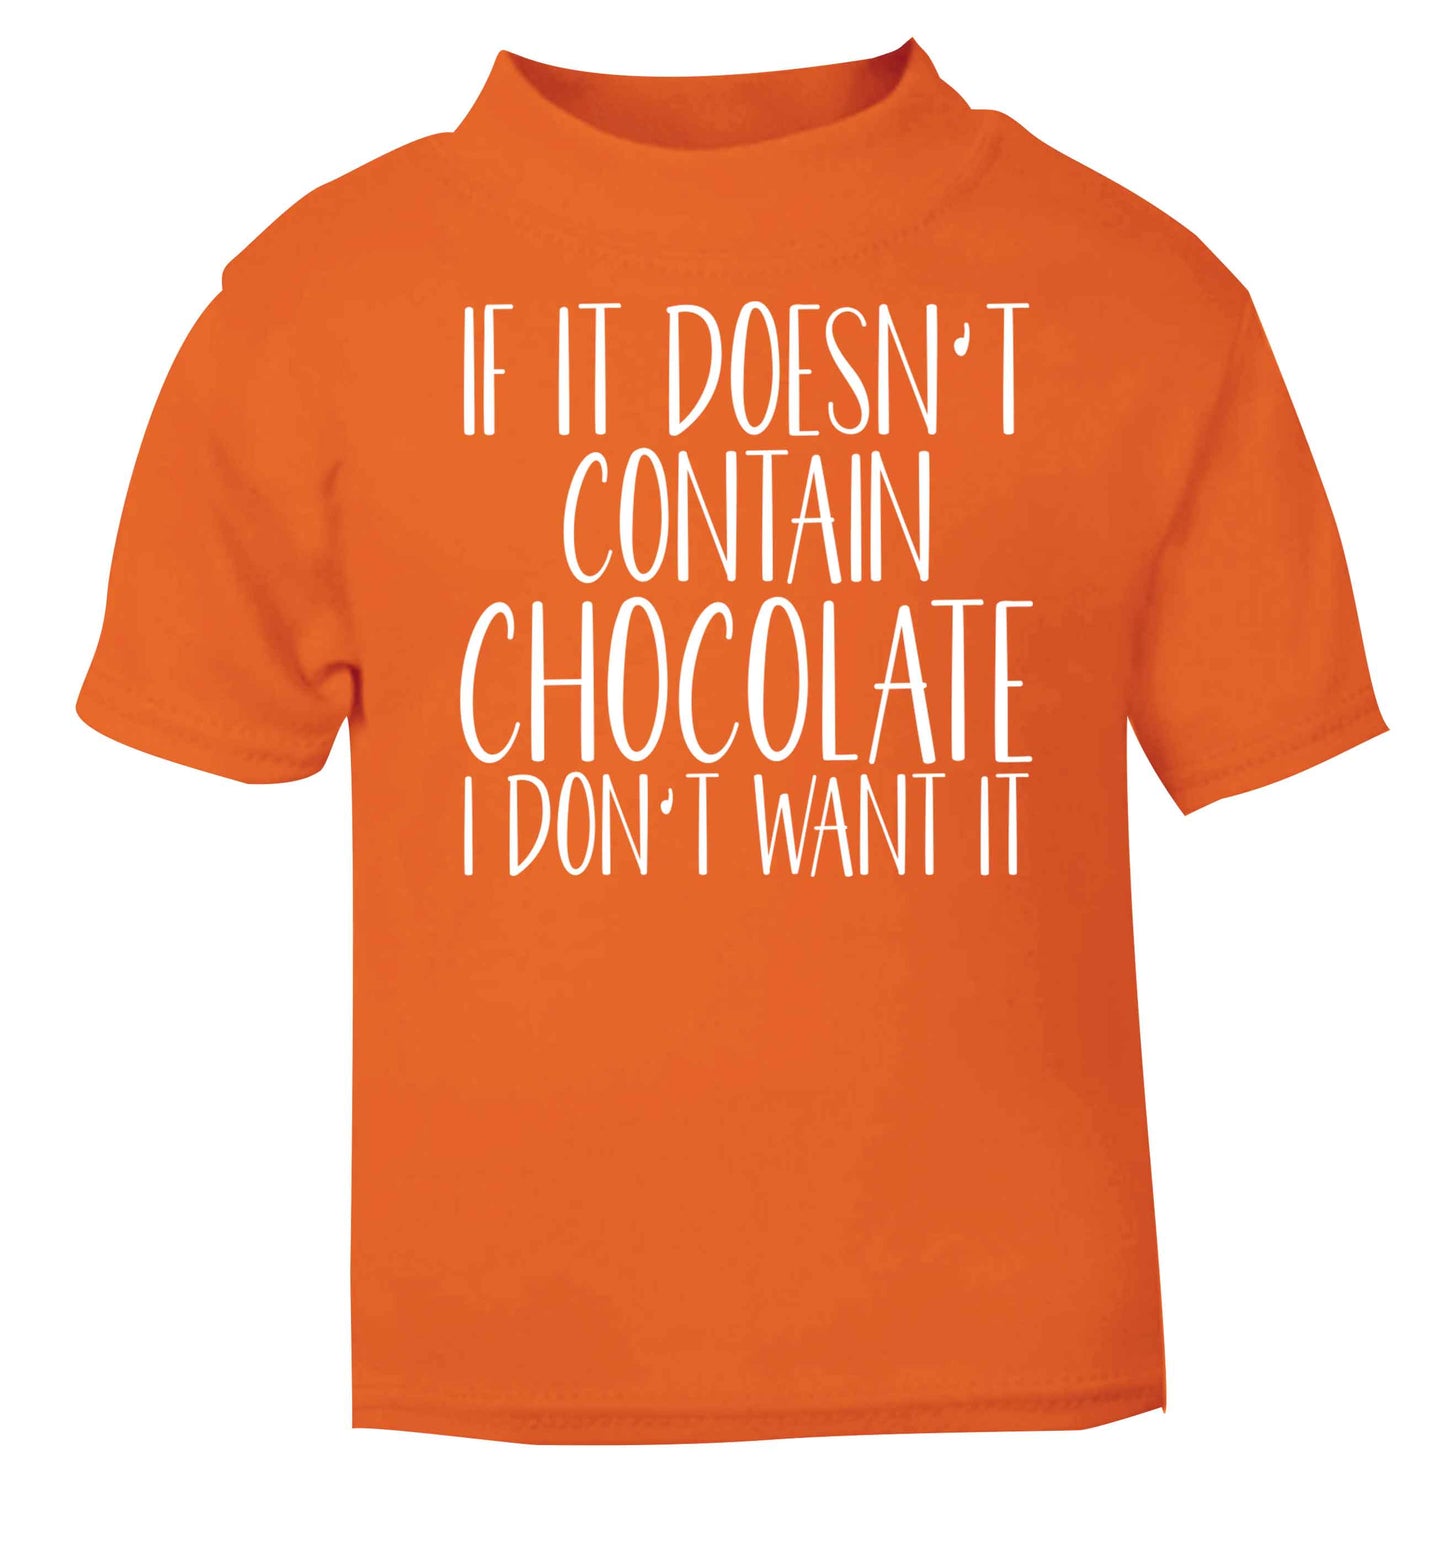 If it doesn't contain chocolate I don't want it orange baby toddler Tshirt 2 Years